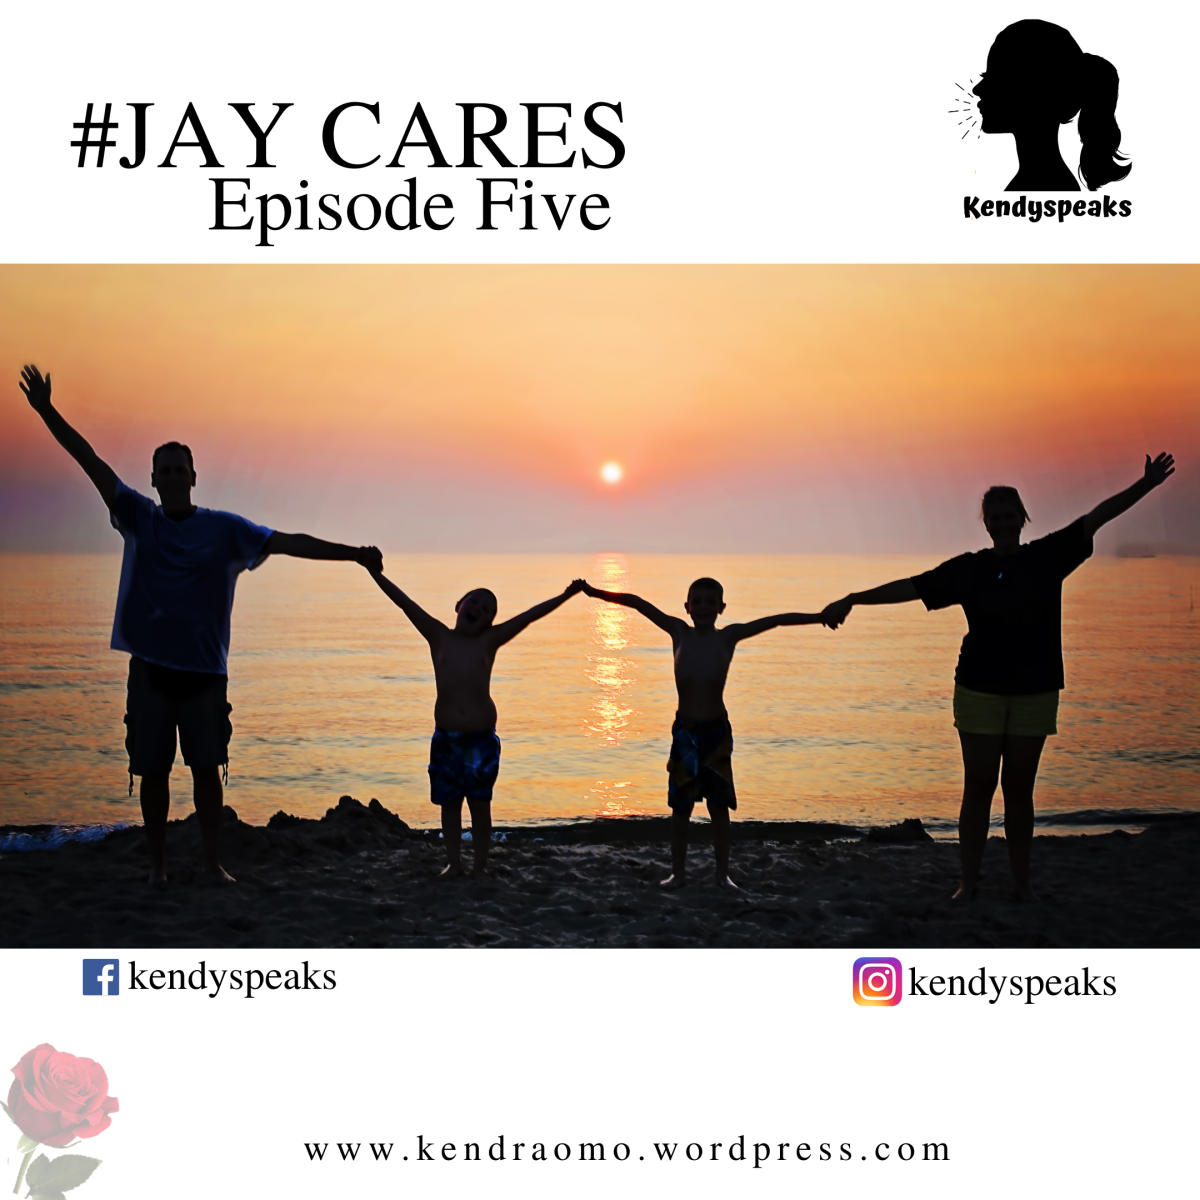 Jay Cares (Episode Five)